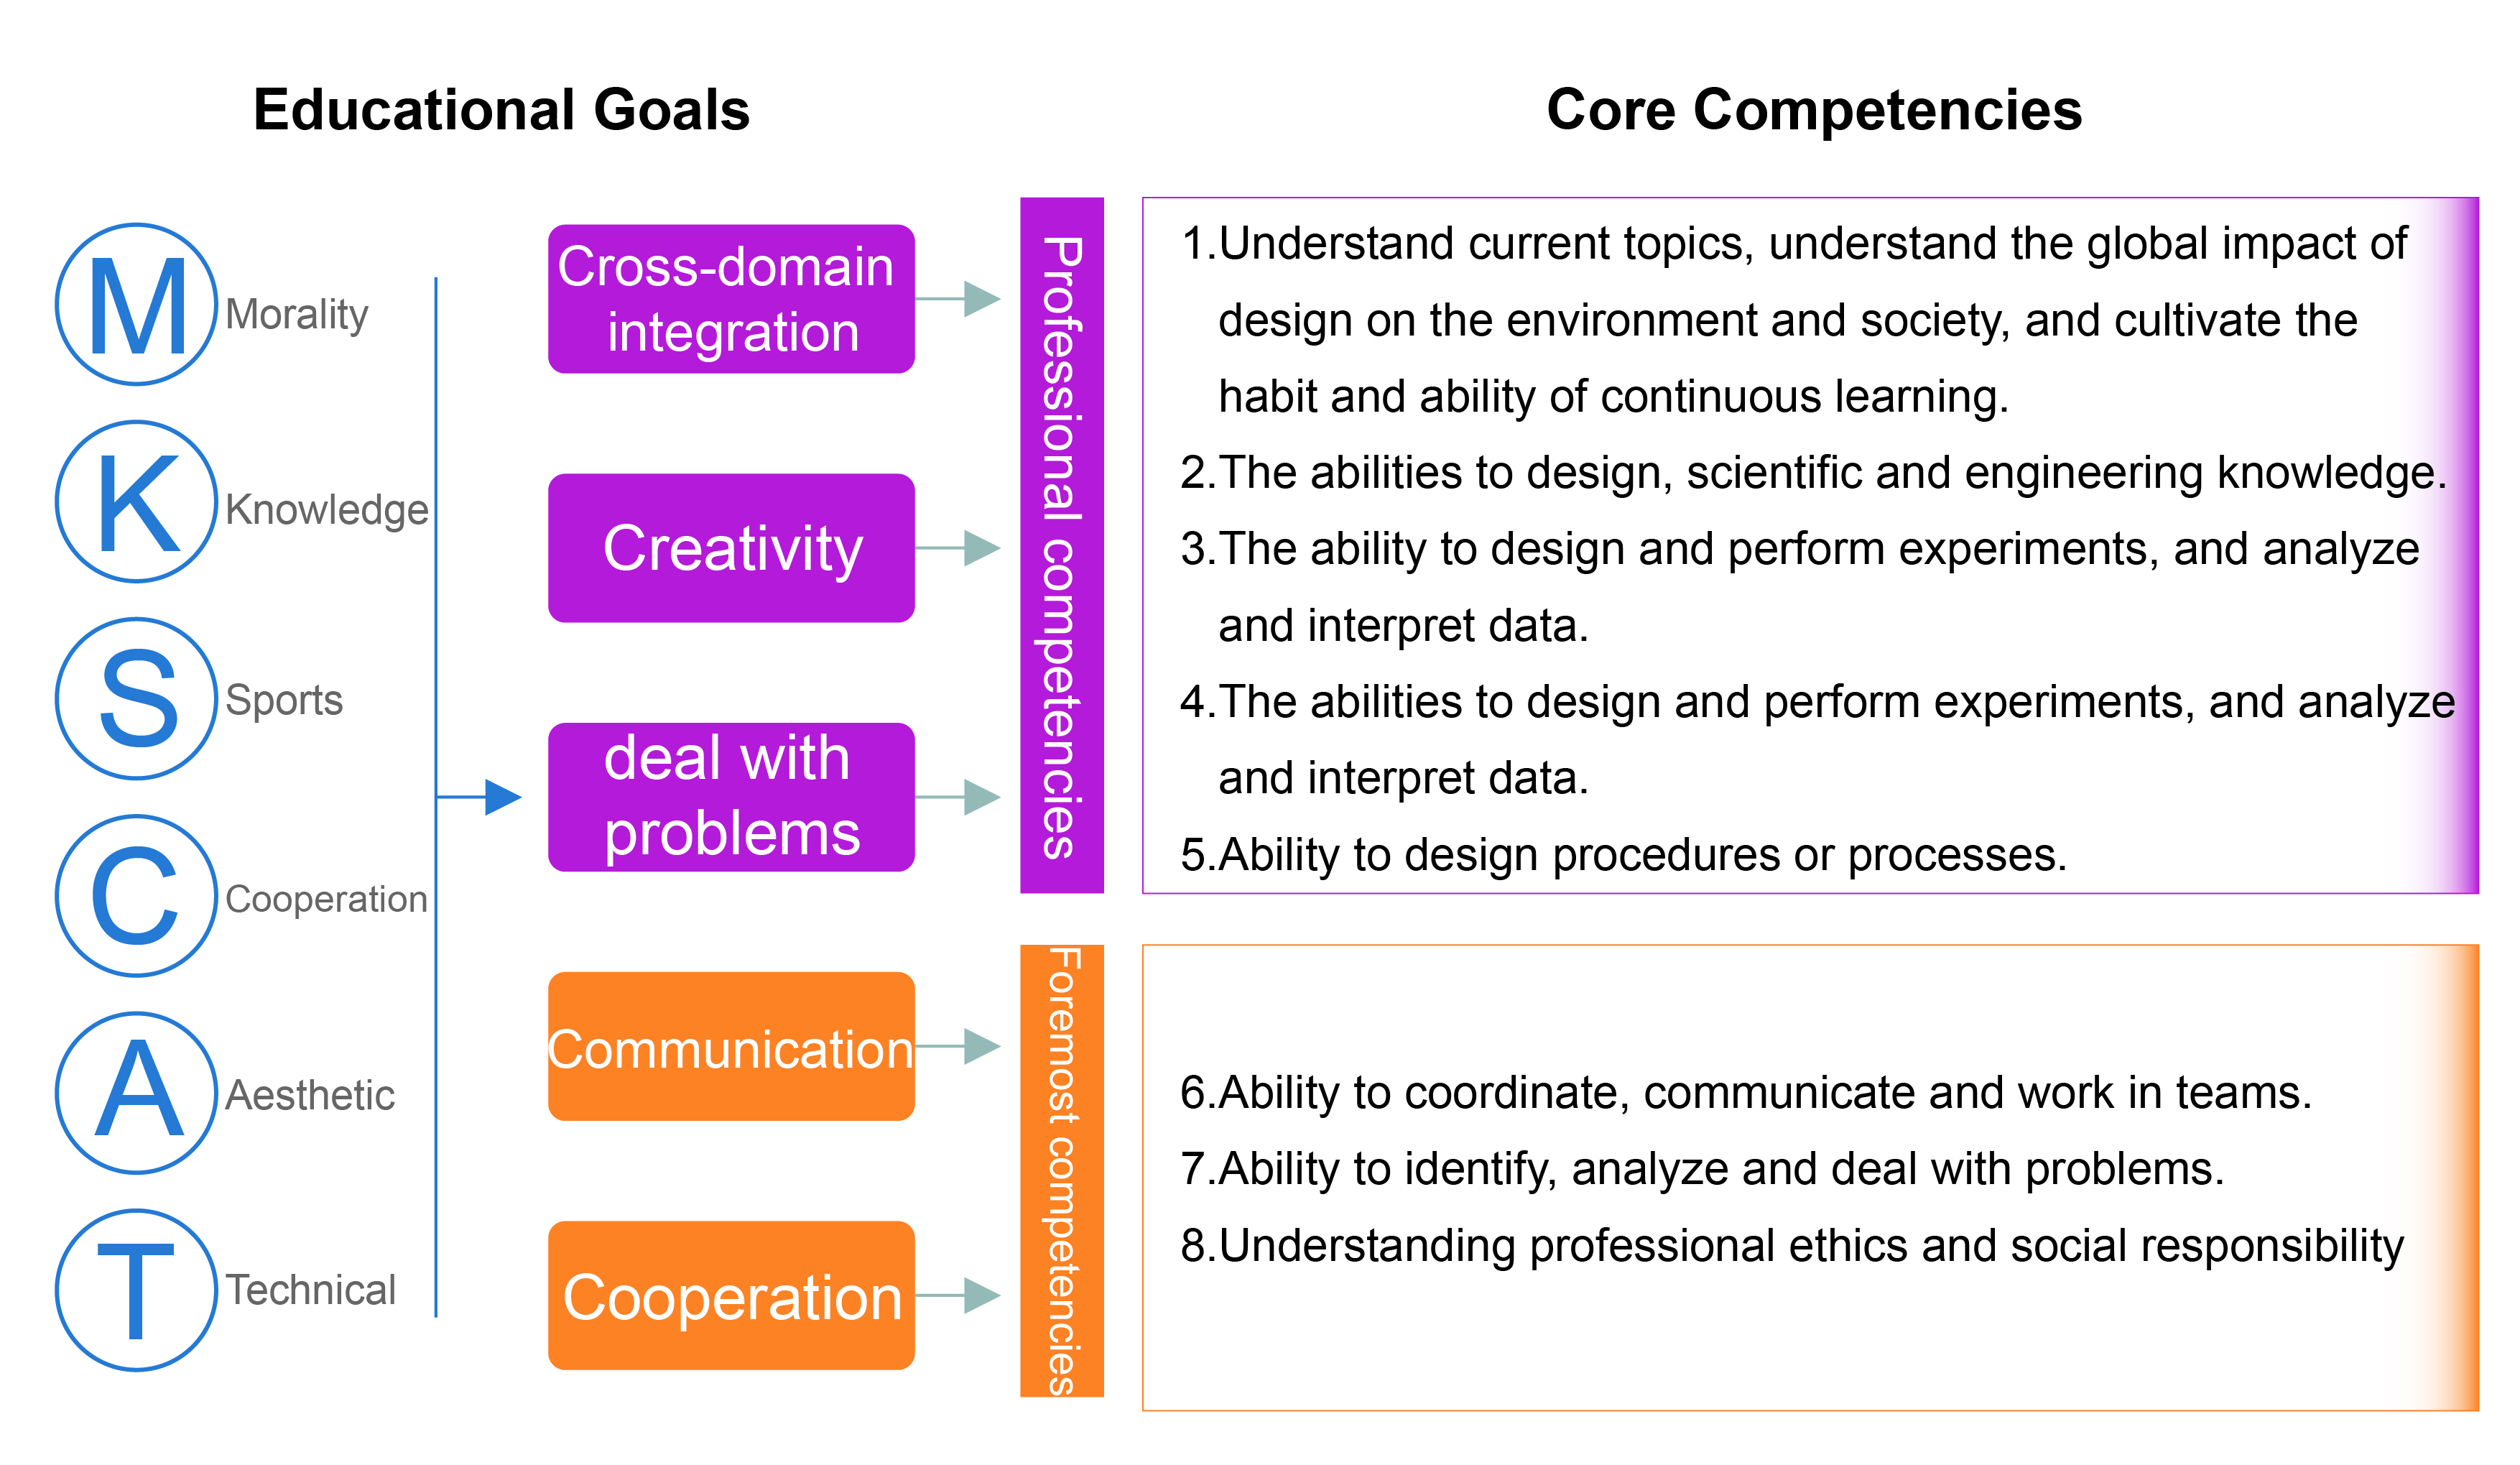 Educational Goals and Core Competencies relation chart